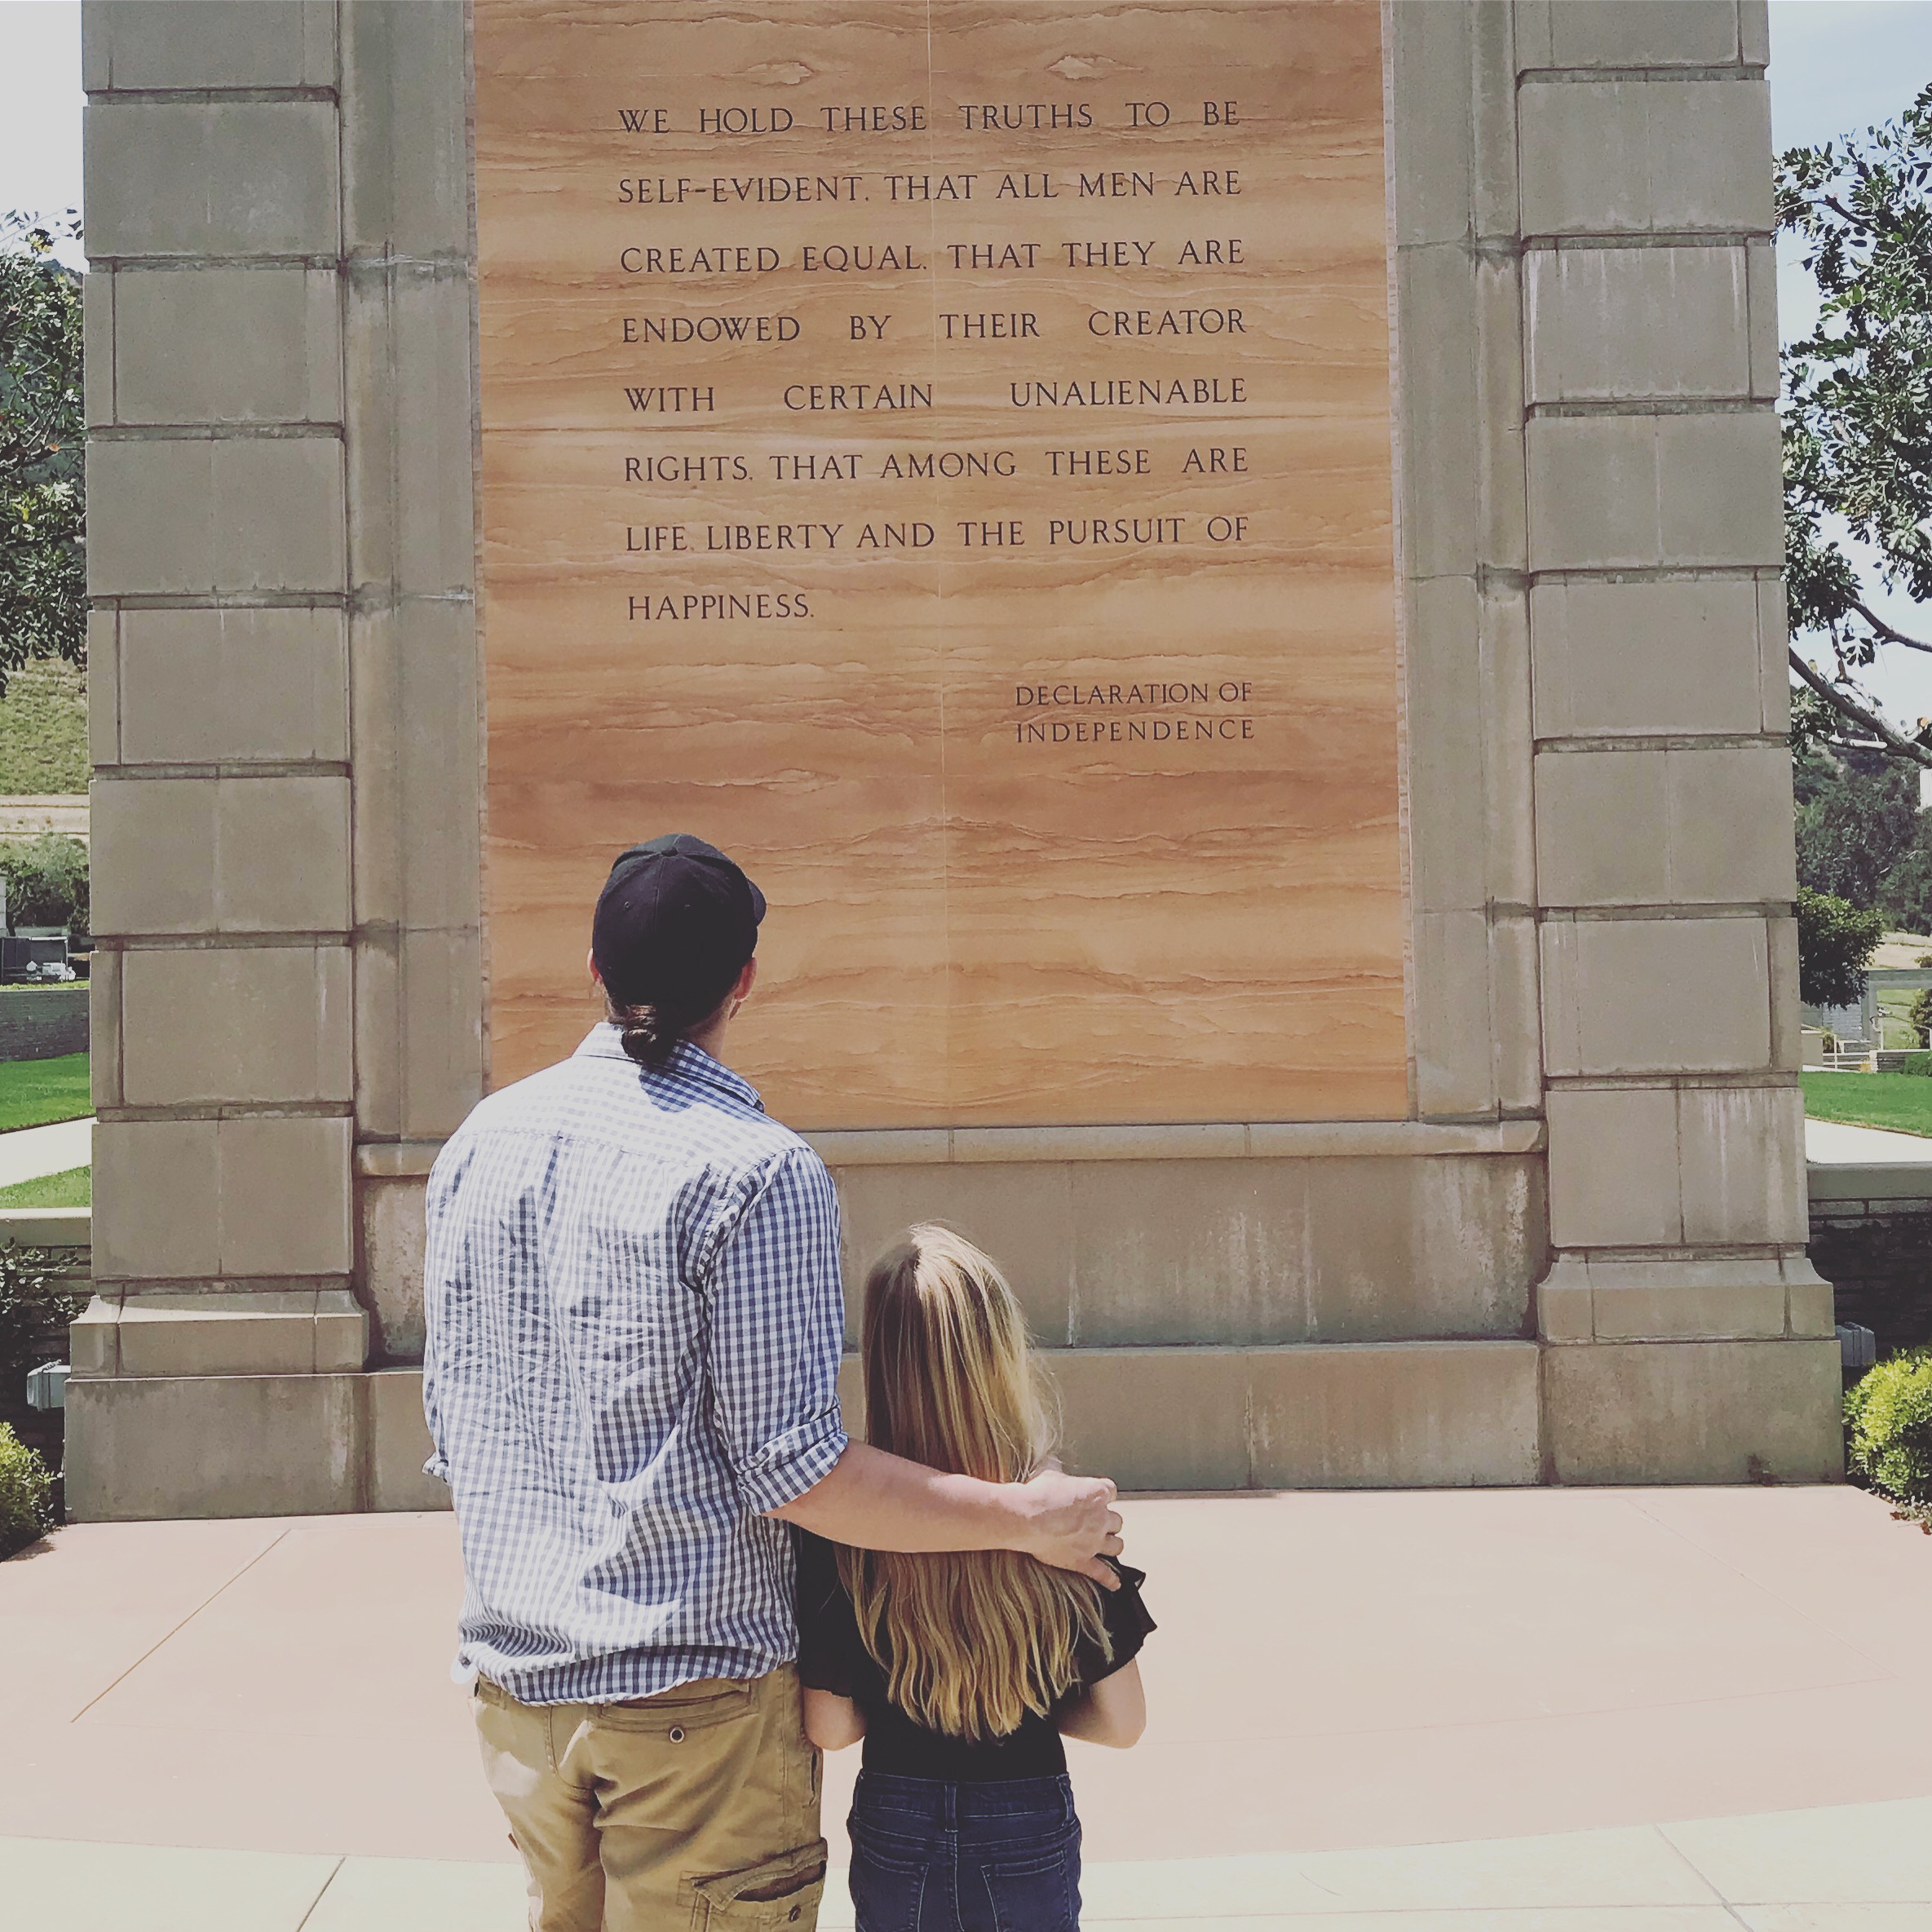 Tousey family at the Declaration of Independence Monument.  Photo:  Jen Tousey